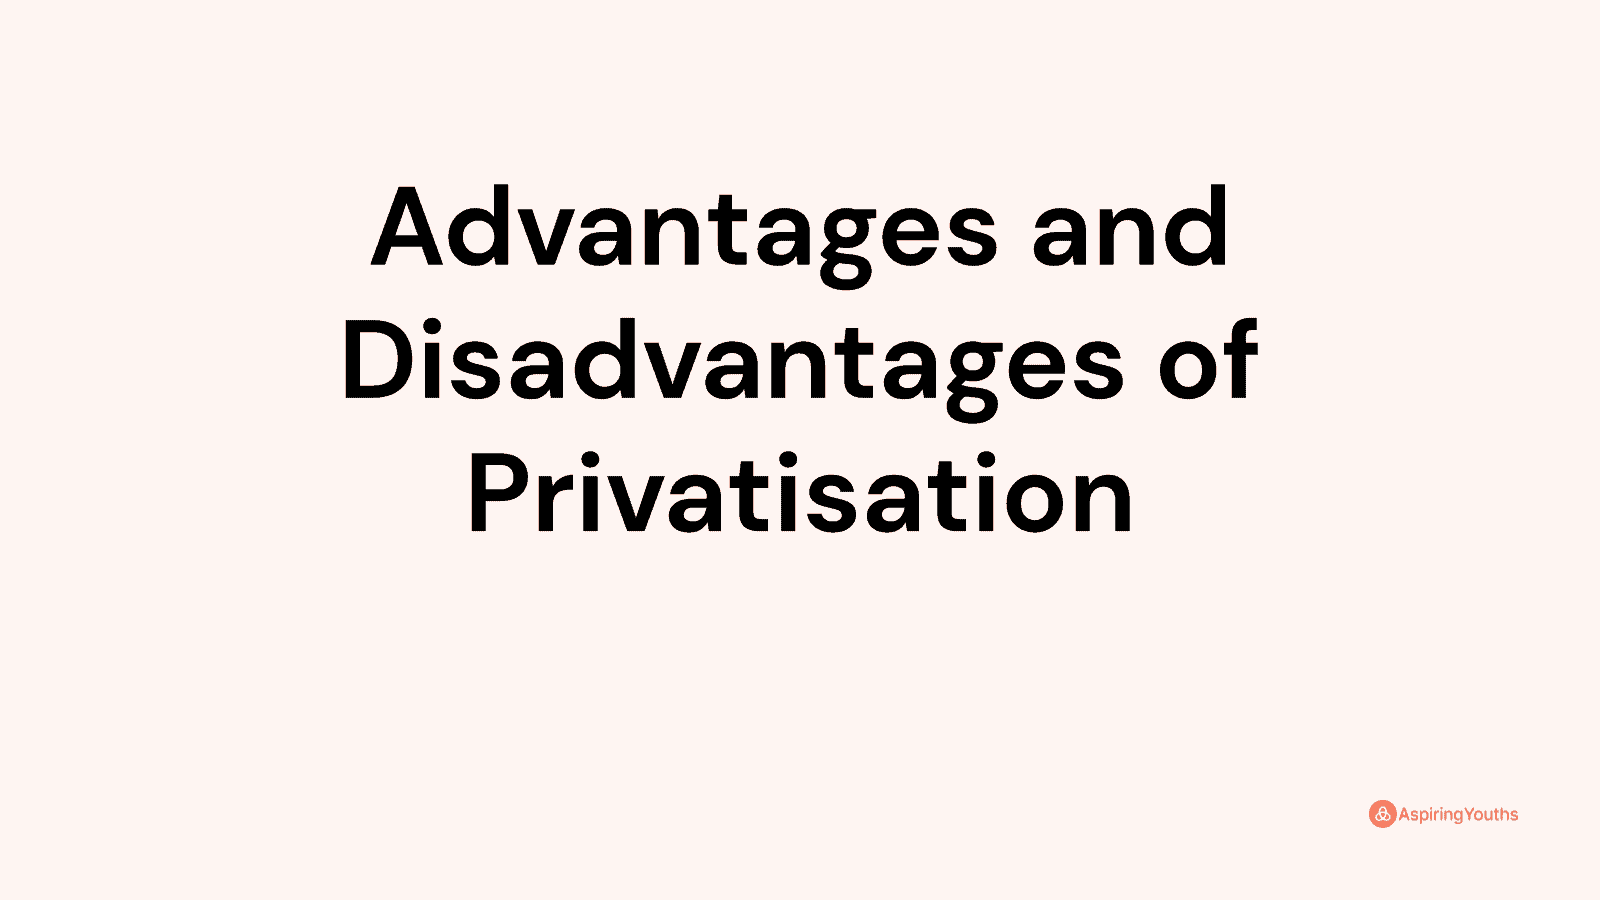 Advantages and disadvantages of Privatisation